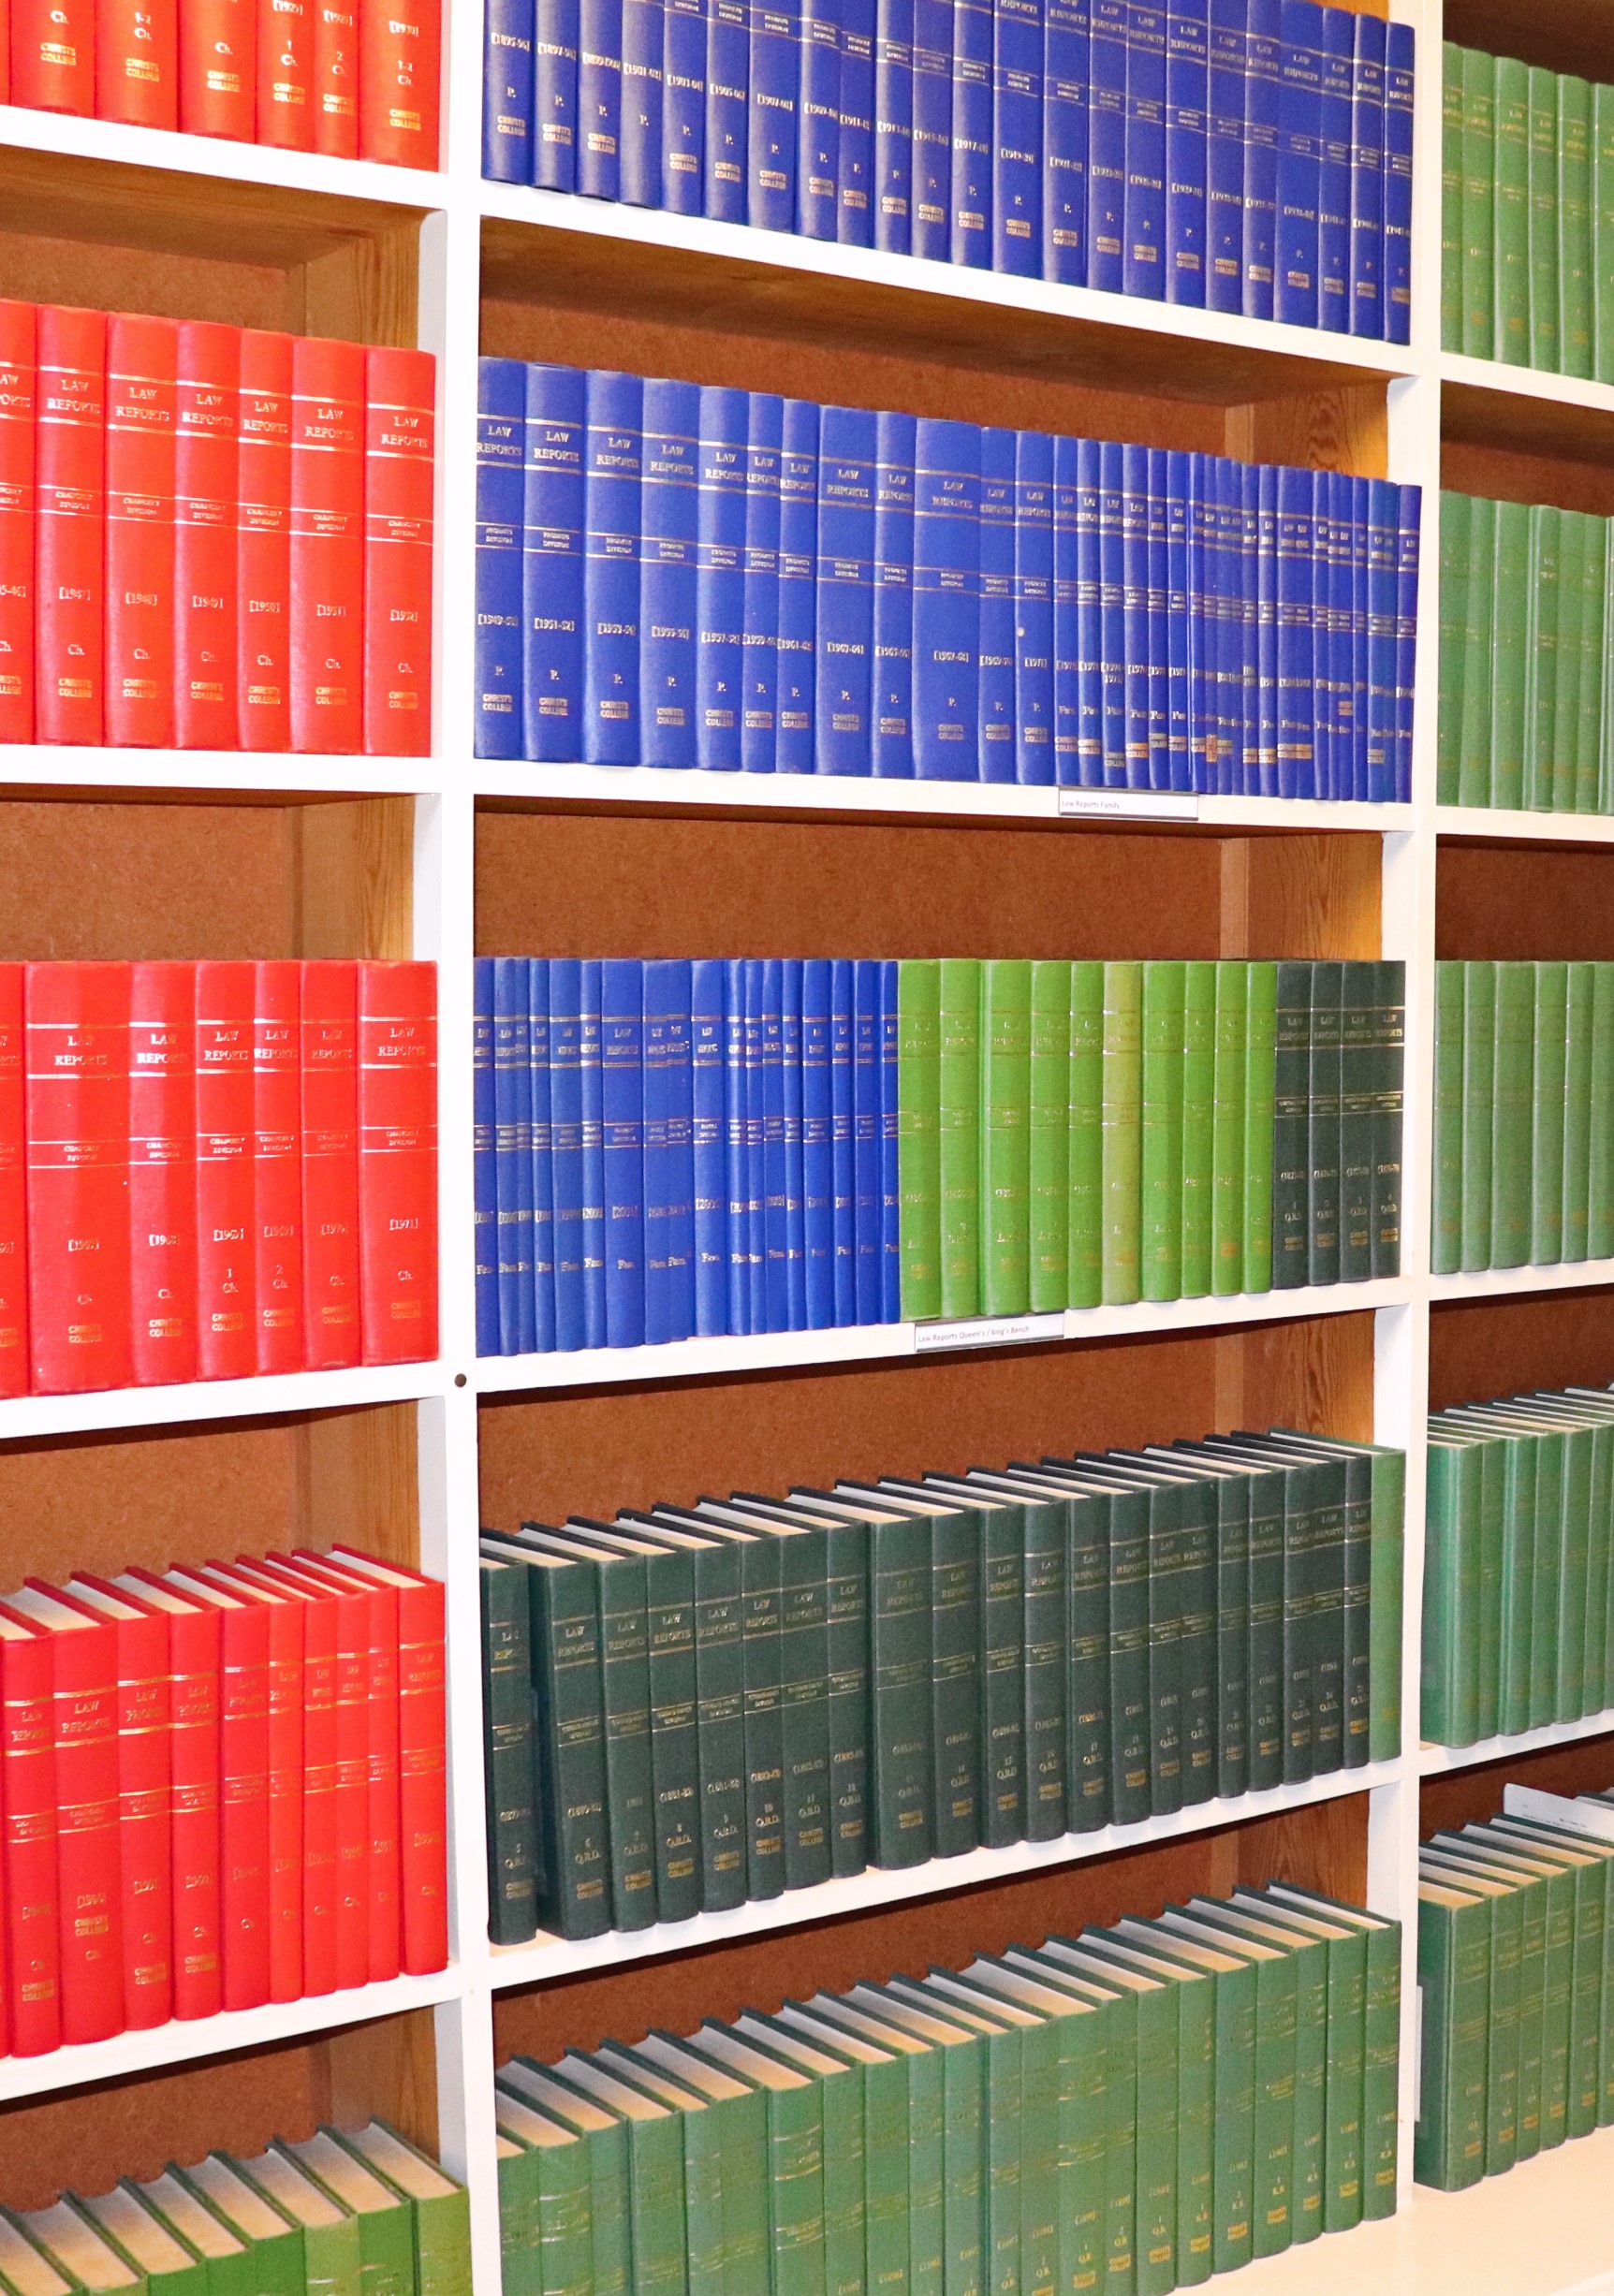 Law journals on shelves